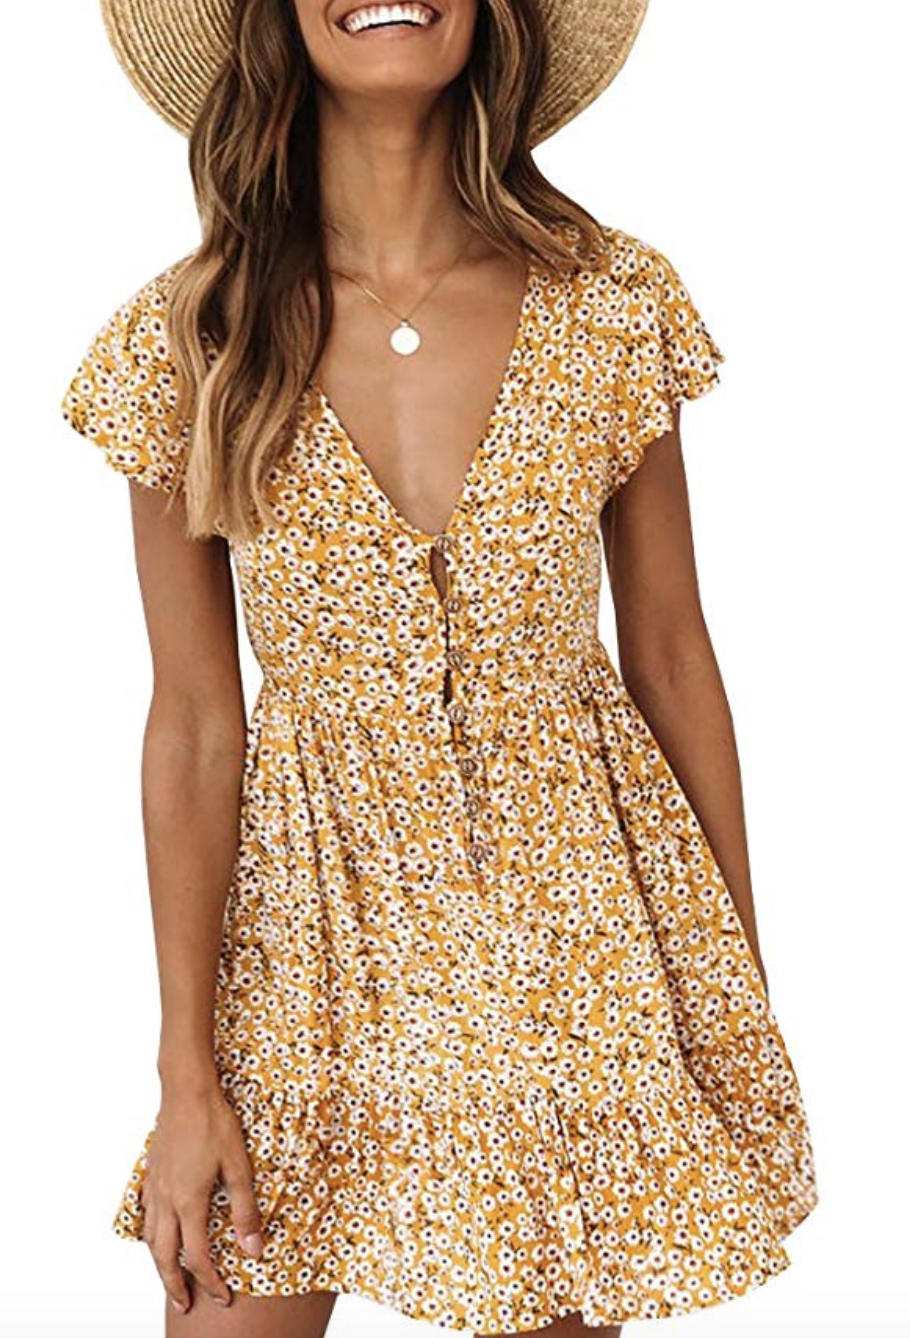 Top Amazon Summer Finds from 2019 - Lively Craze